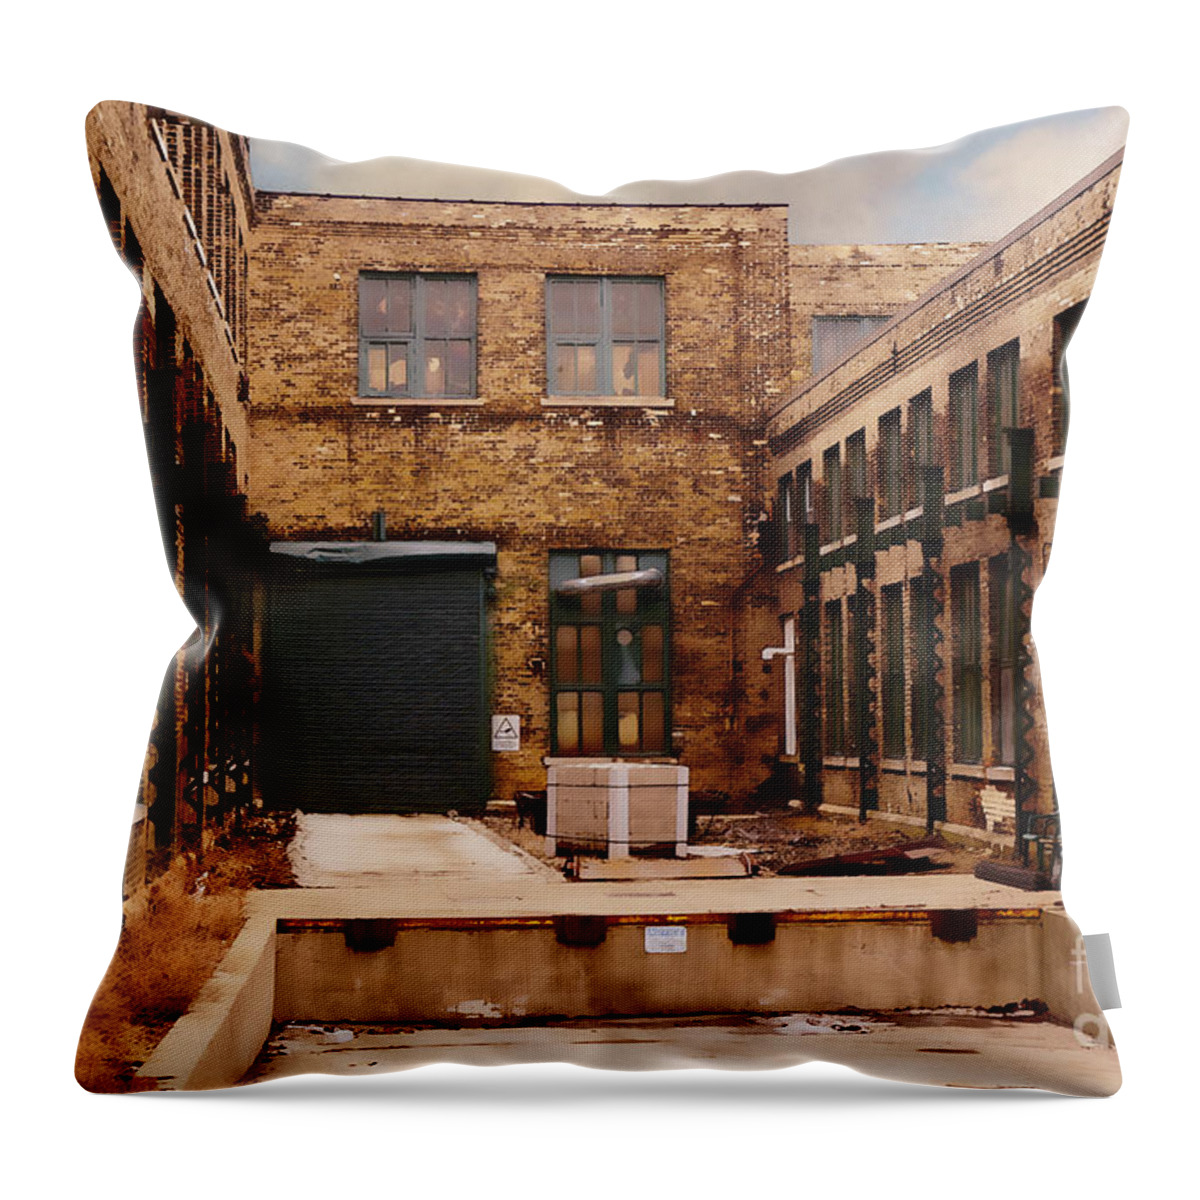 Architecture Throw Pillow featuring the digital art Loading Dock by David Blank